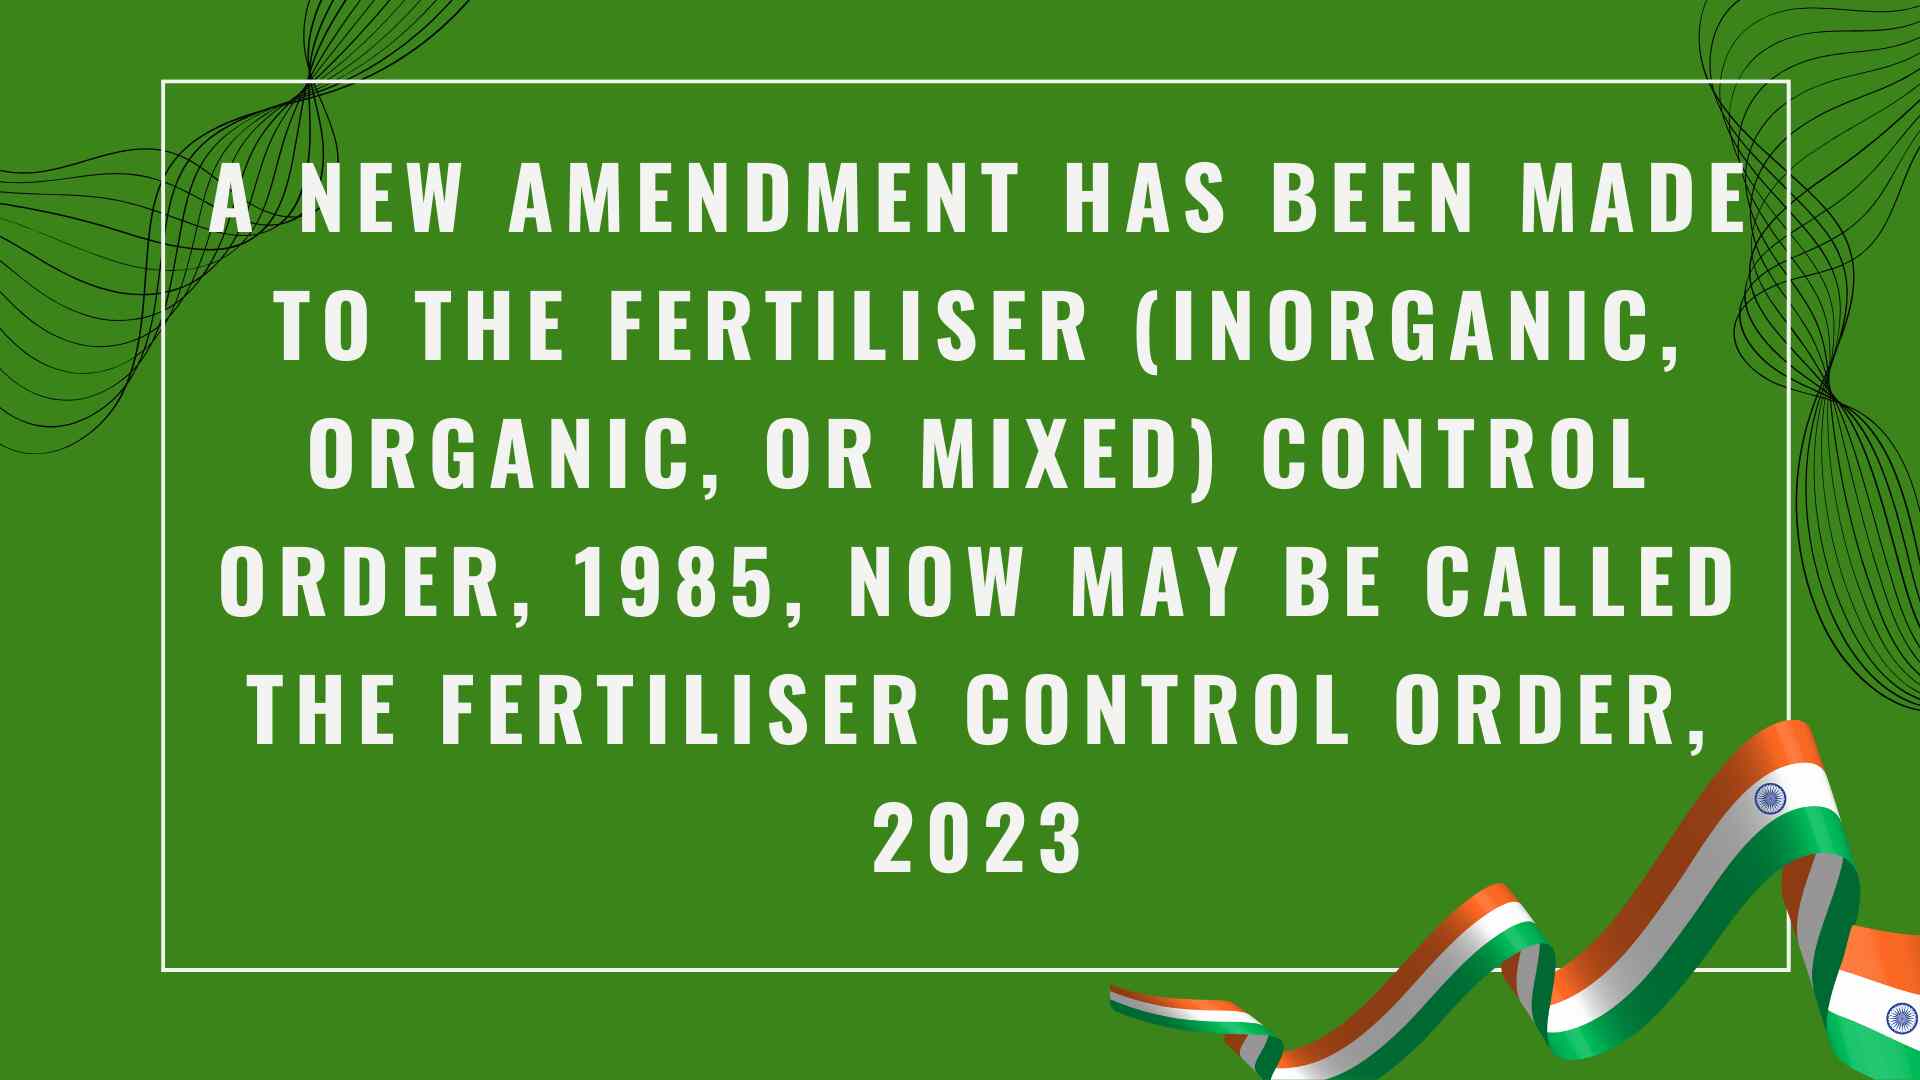 Ministry of agriculture and welfare introduced micronutrients with their specifications to use in the Fertilizer formulation.